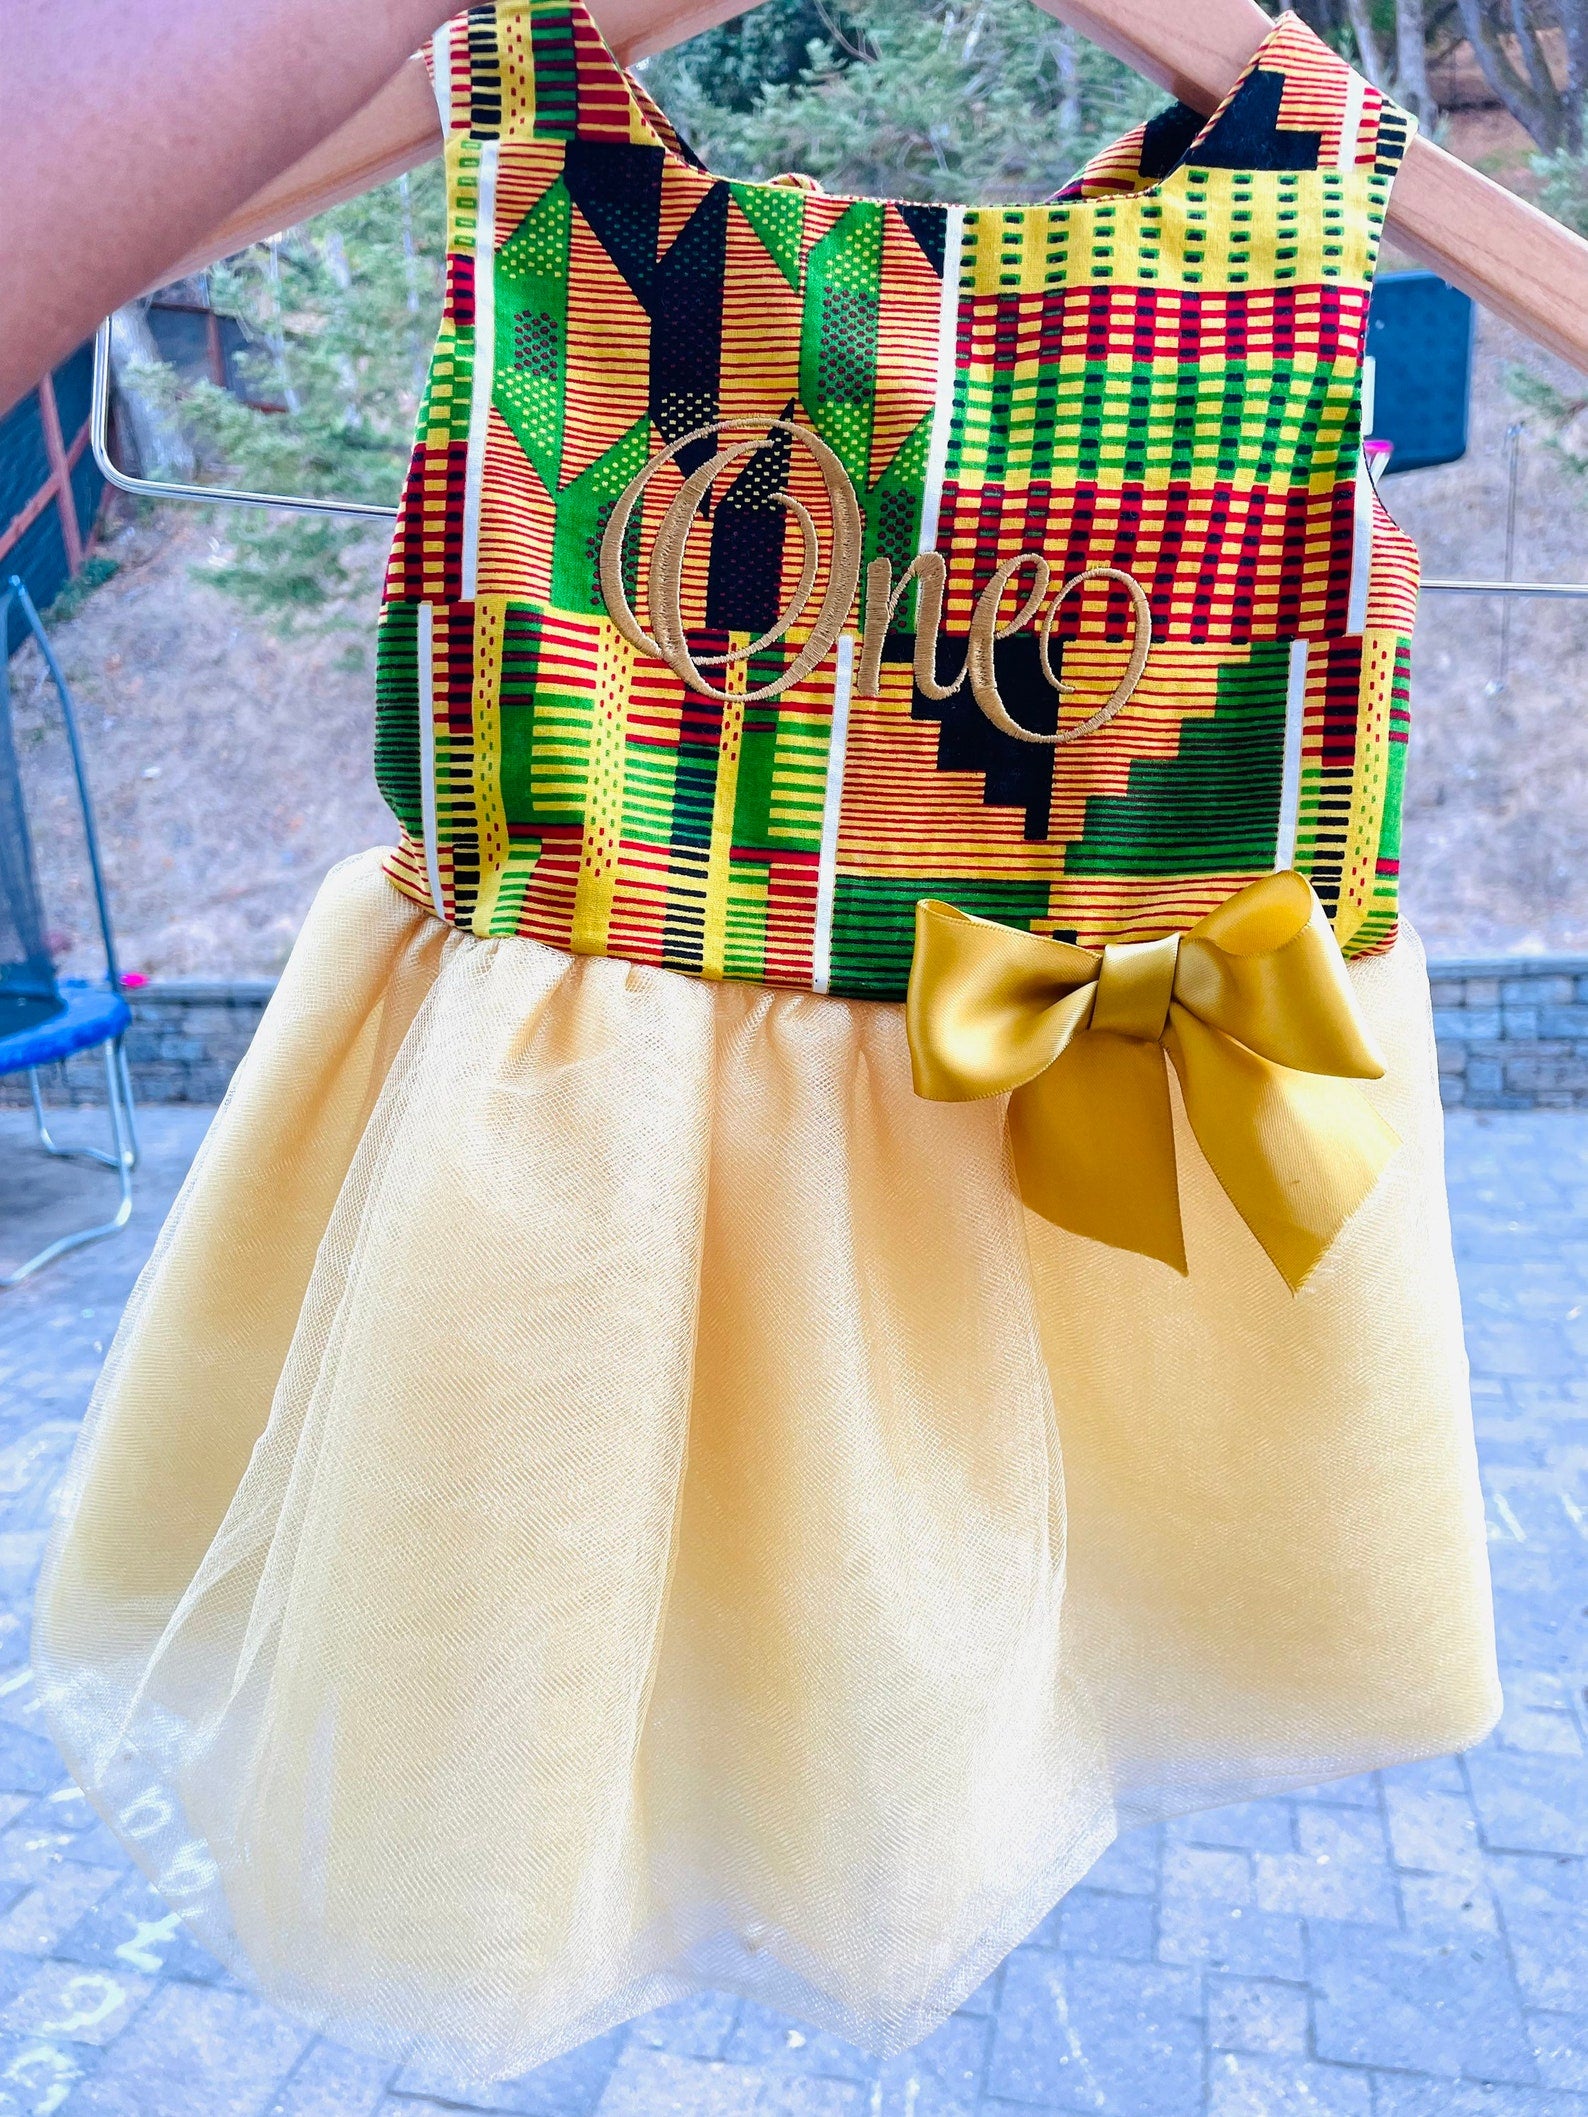 Personalized African print birthday dress for baby girl